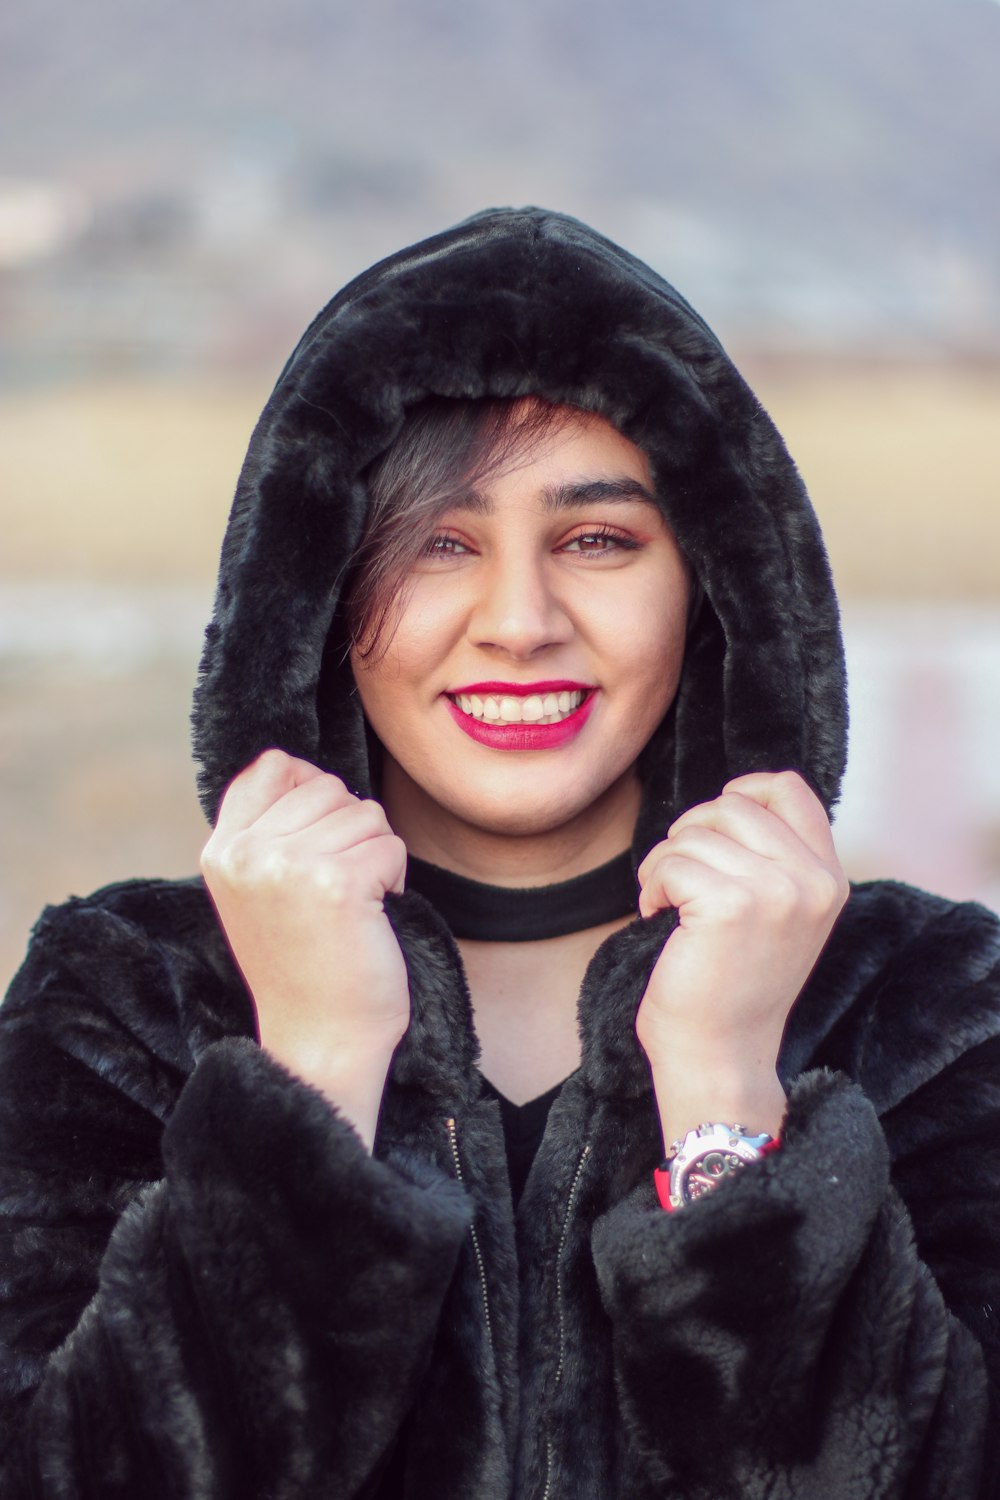 a woman wearing a black hooded jacket and smiling